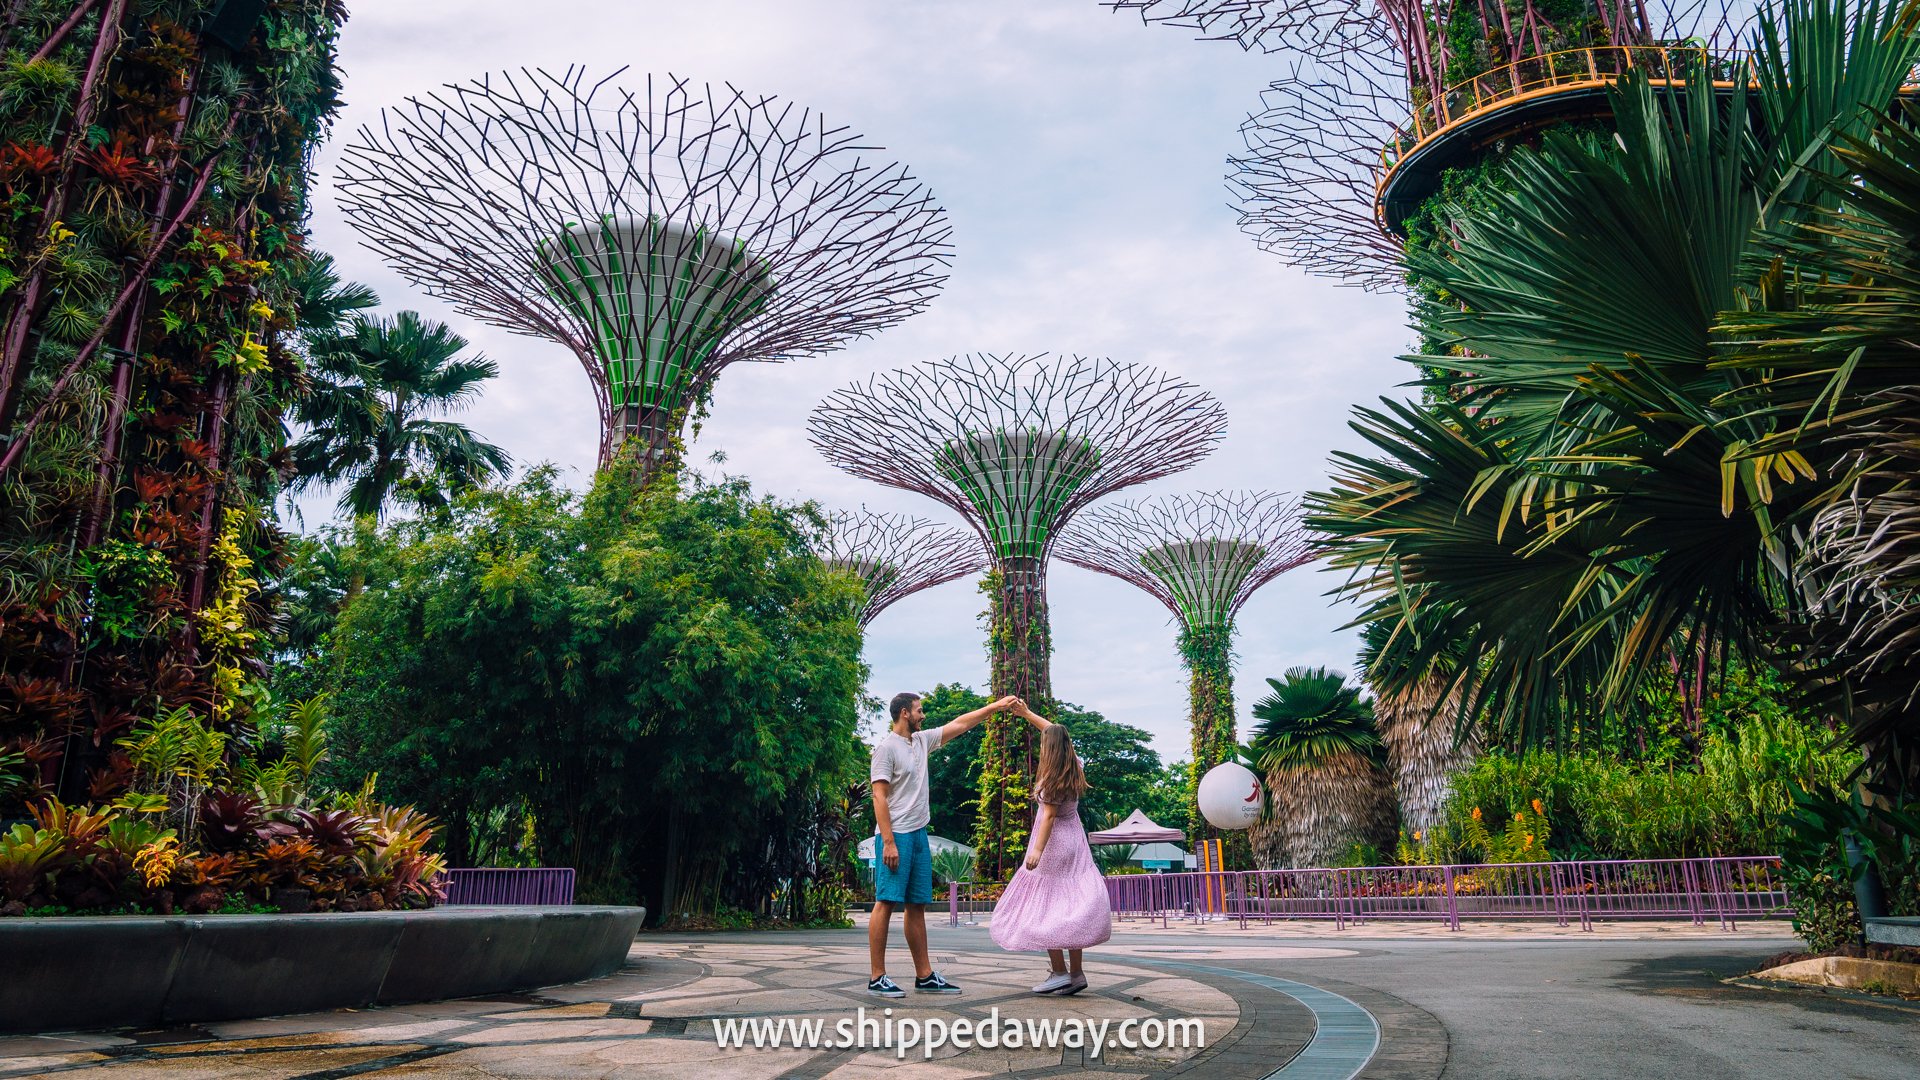 Top Things To See in Gardens by the Bay Singapore - Travel Guide, How to visit